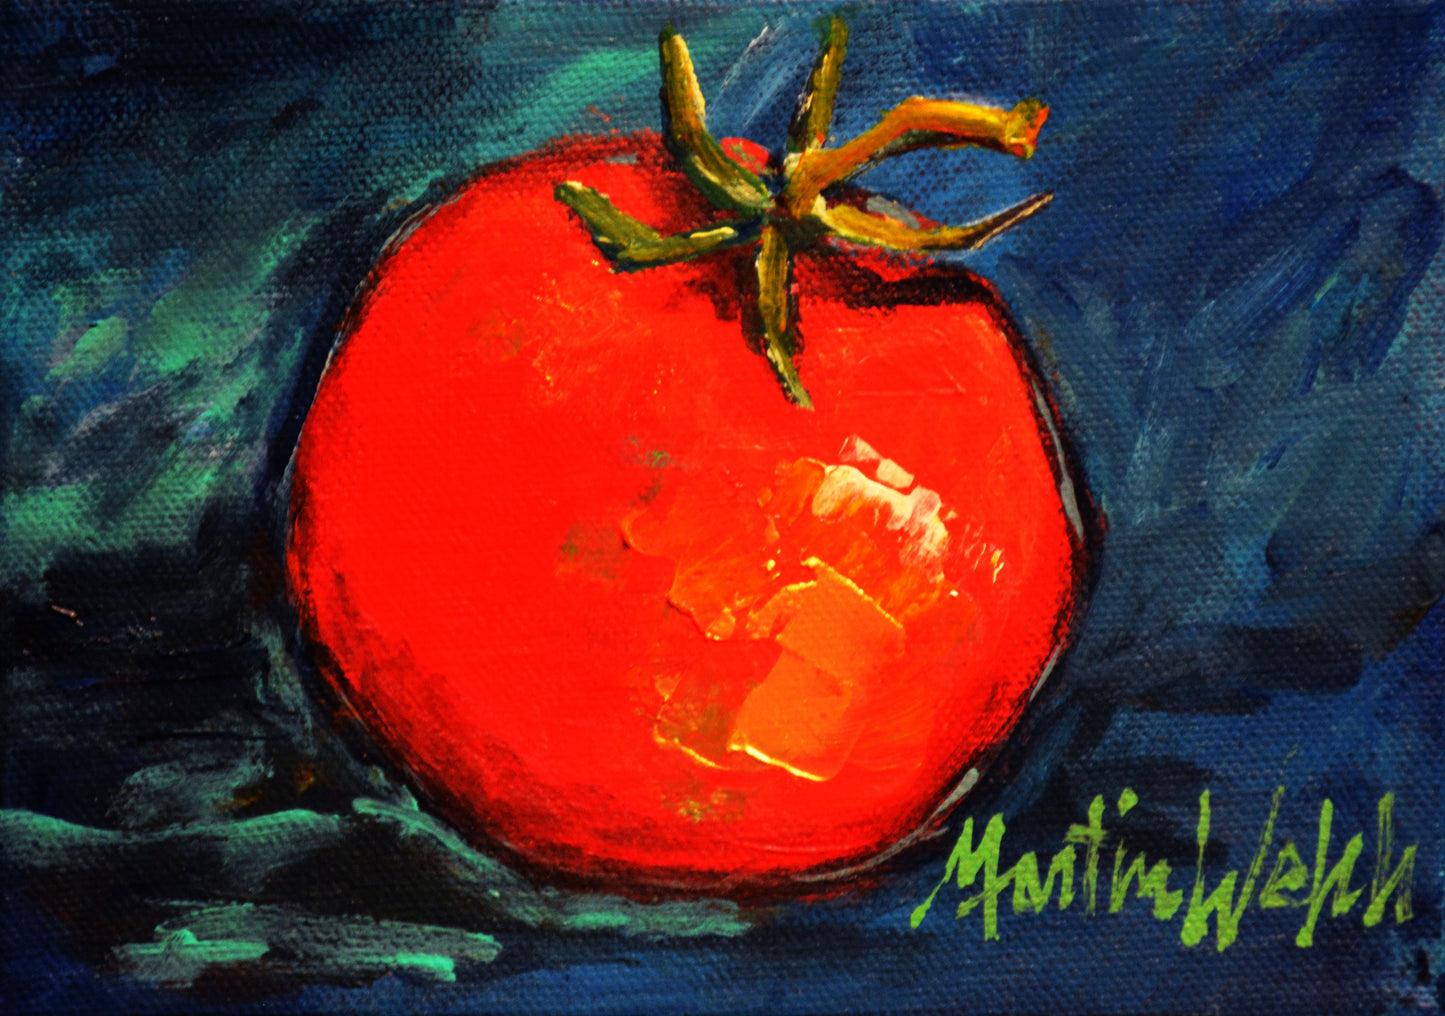 "Lil Mater" Original Painting of a red tomato 5x7